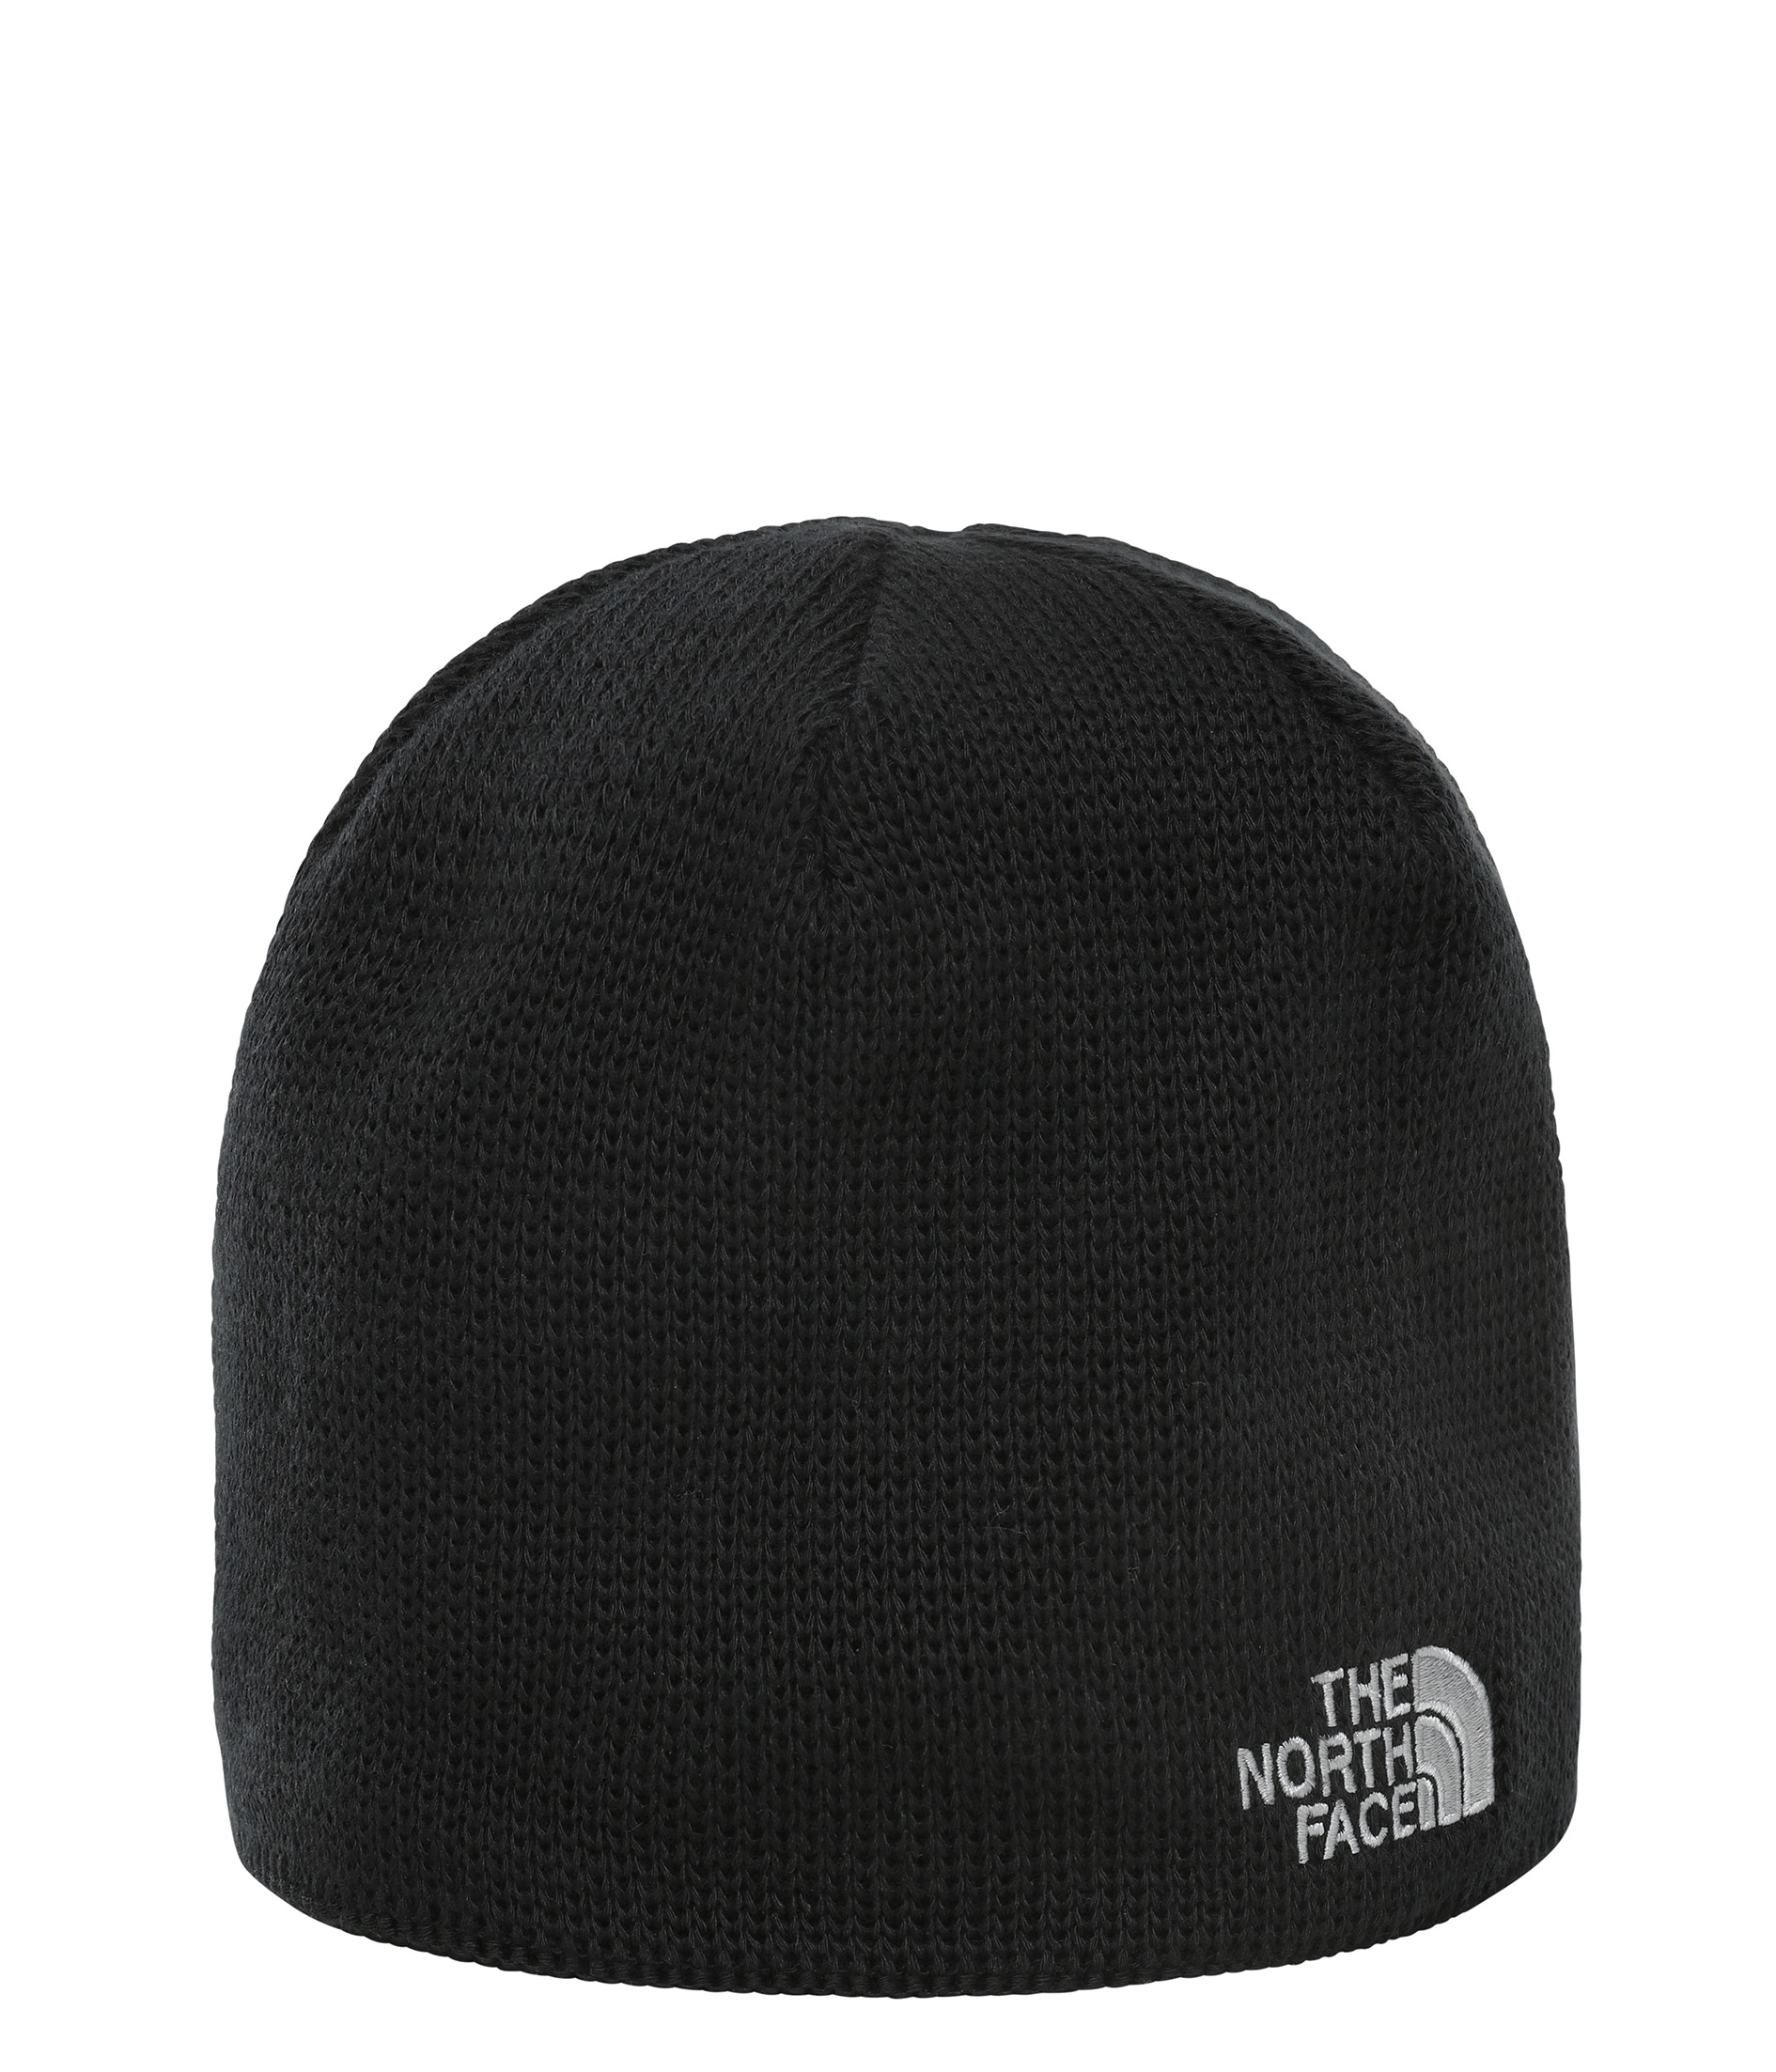 The North Face Bones Recycled Beanie Muts